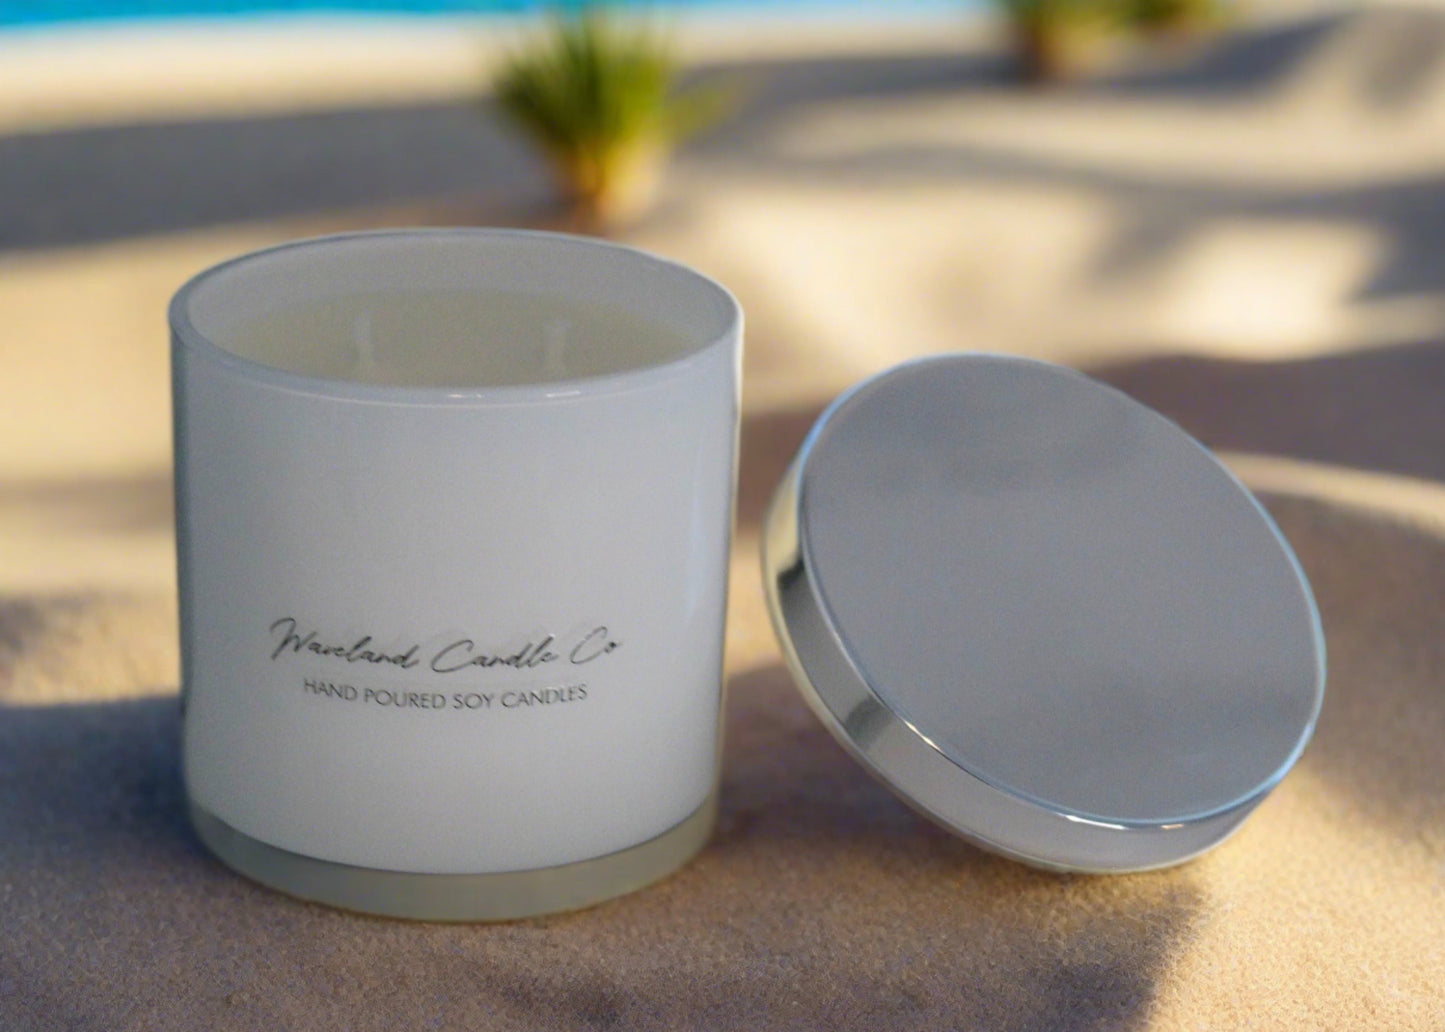 Baja Cactus Blossom - Monticiano Milk White Glass Soy Candle